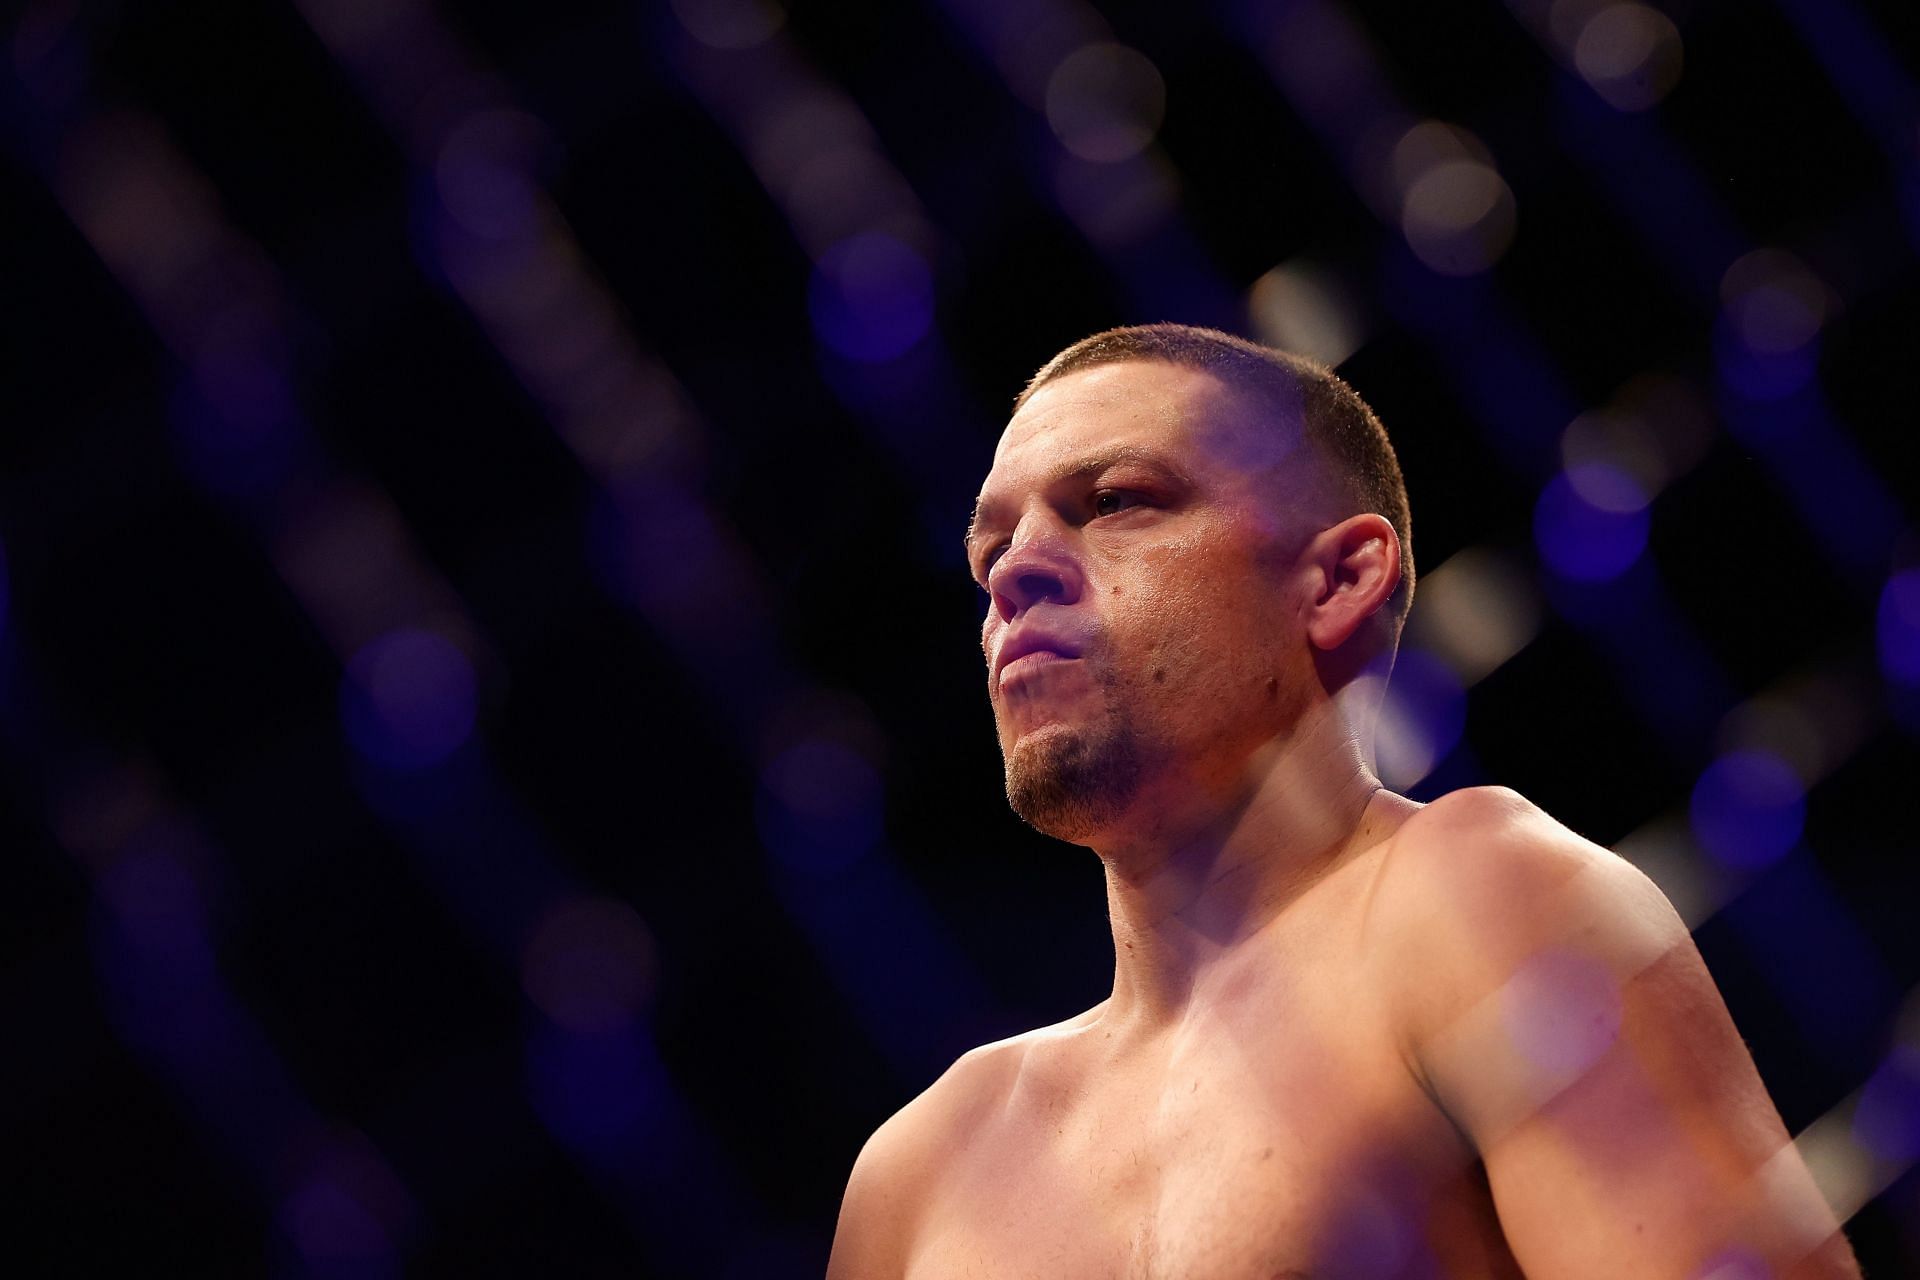 Nate Diaz is renowned for coming on strong in the later parts of his fights